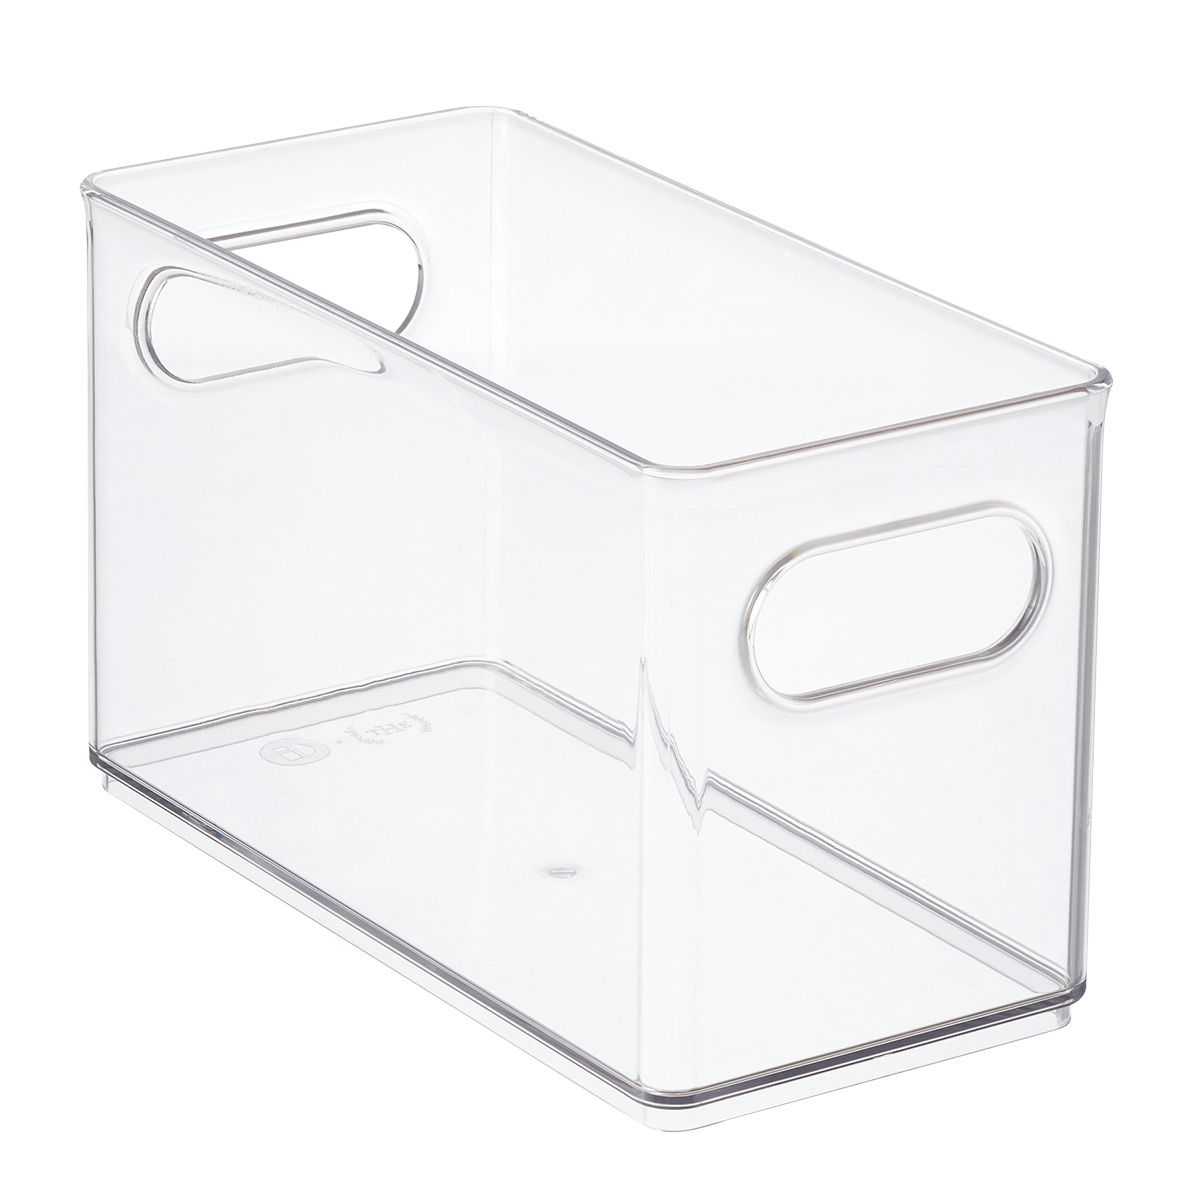 THE HOME EDIT Narrow Pantry Bin ClearSKU:100804314.713 Reviews | The Container Store